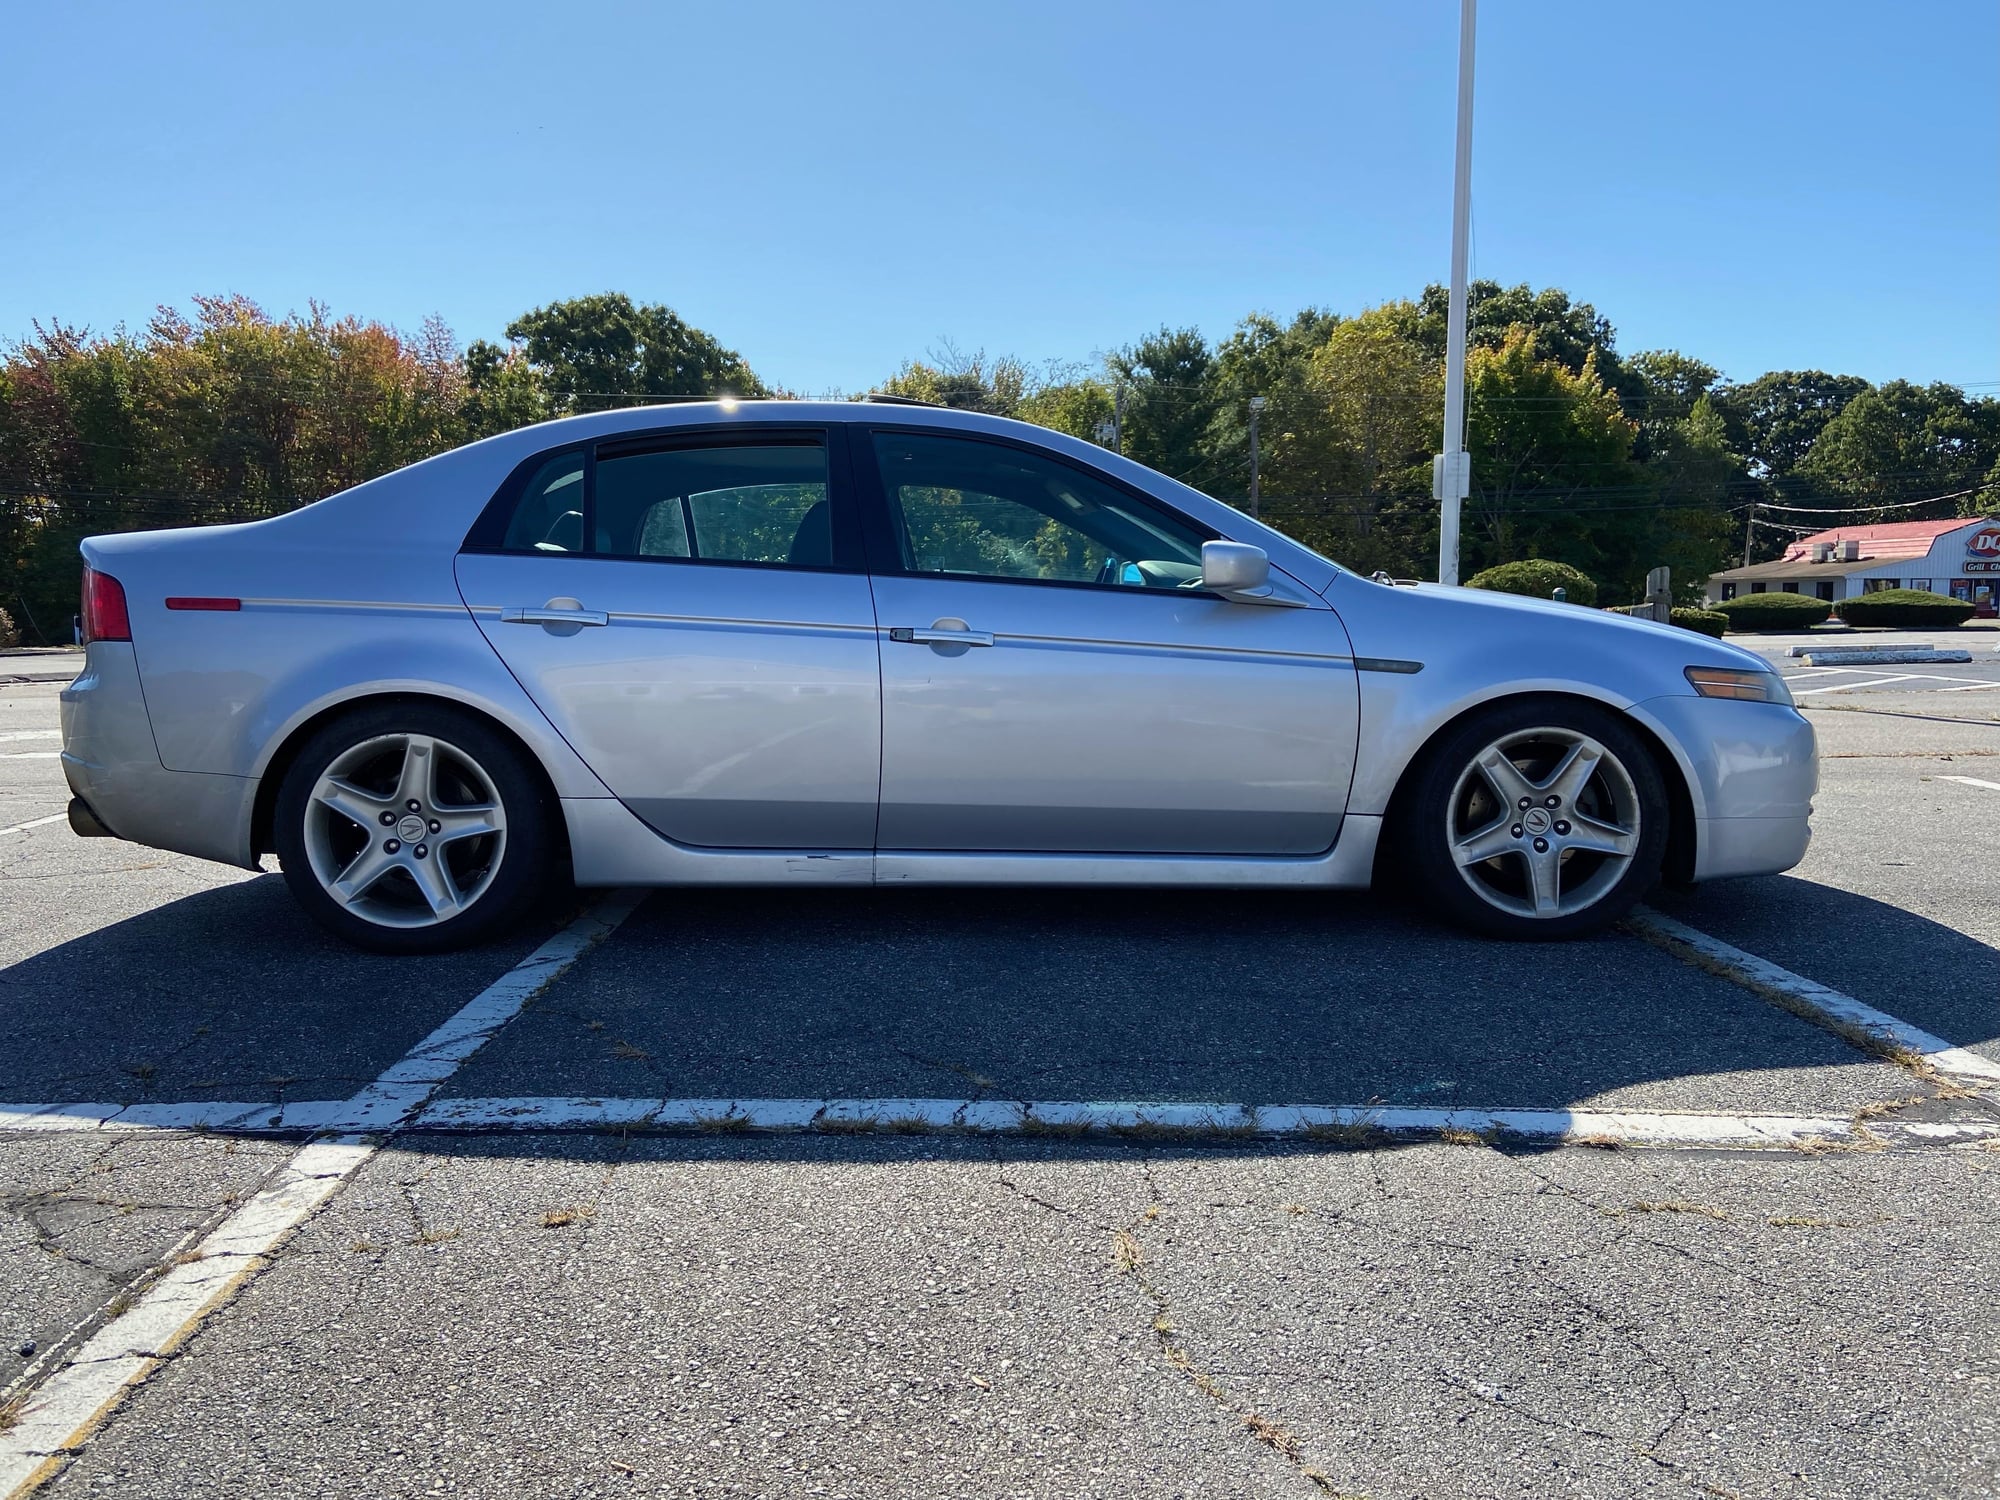 2004 Acura TL - FS: 2004 Acura TL $5500 OBO - Used - Guilford, CT 6437, United States